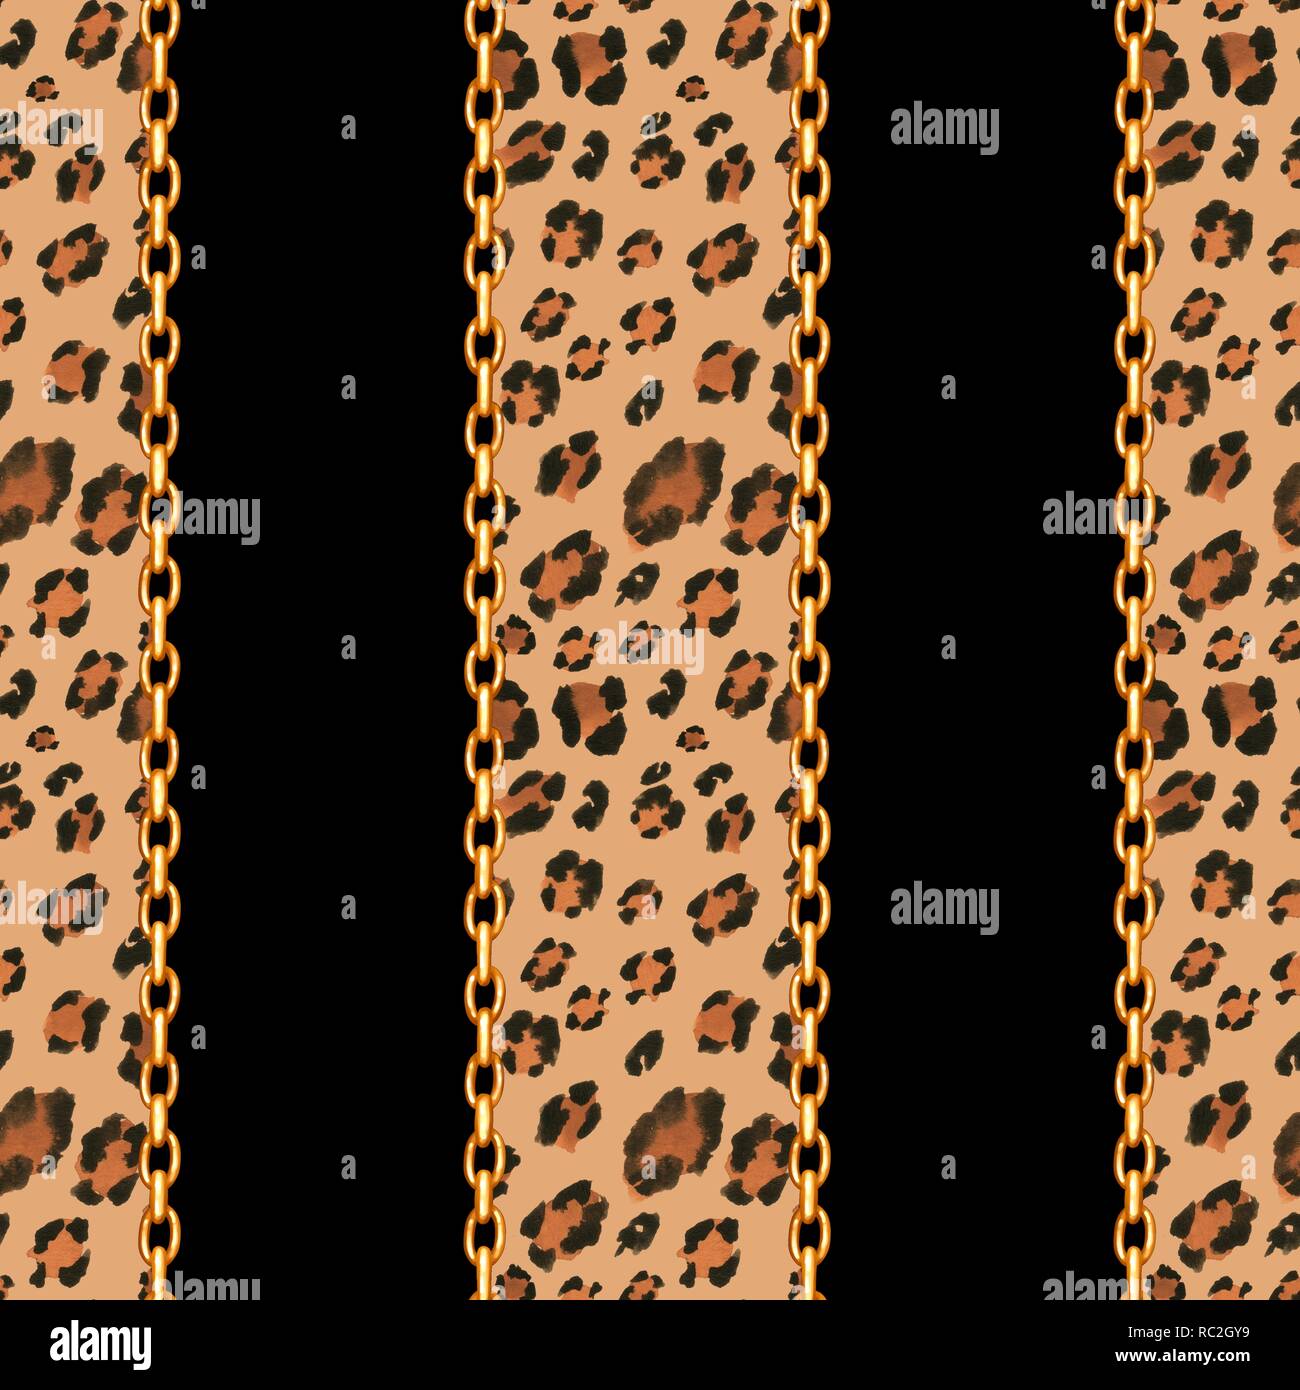 Seamless leopard pattern and golden chains Stock Photo